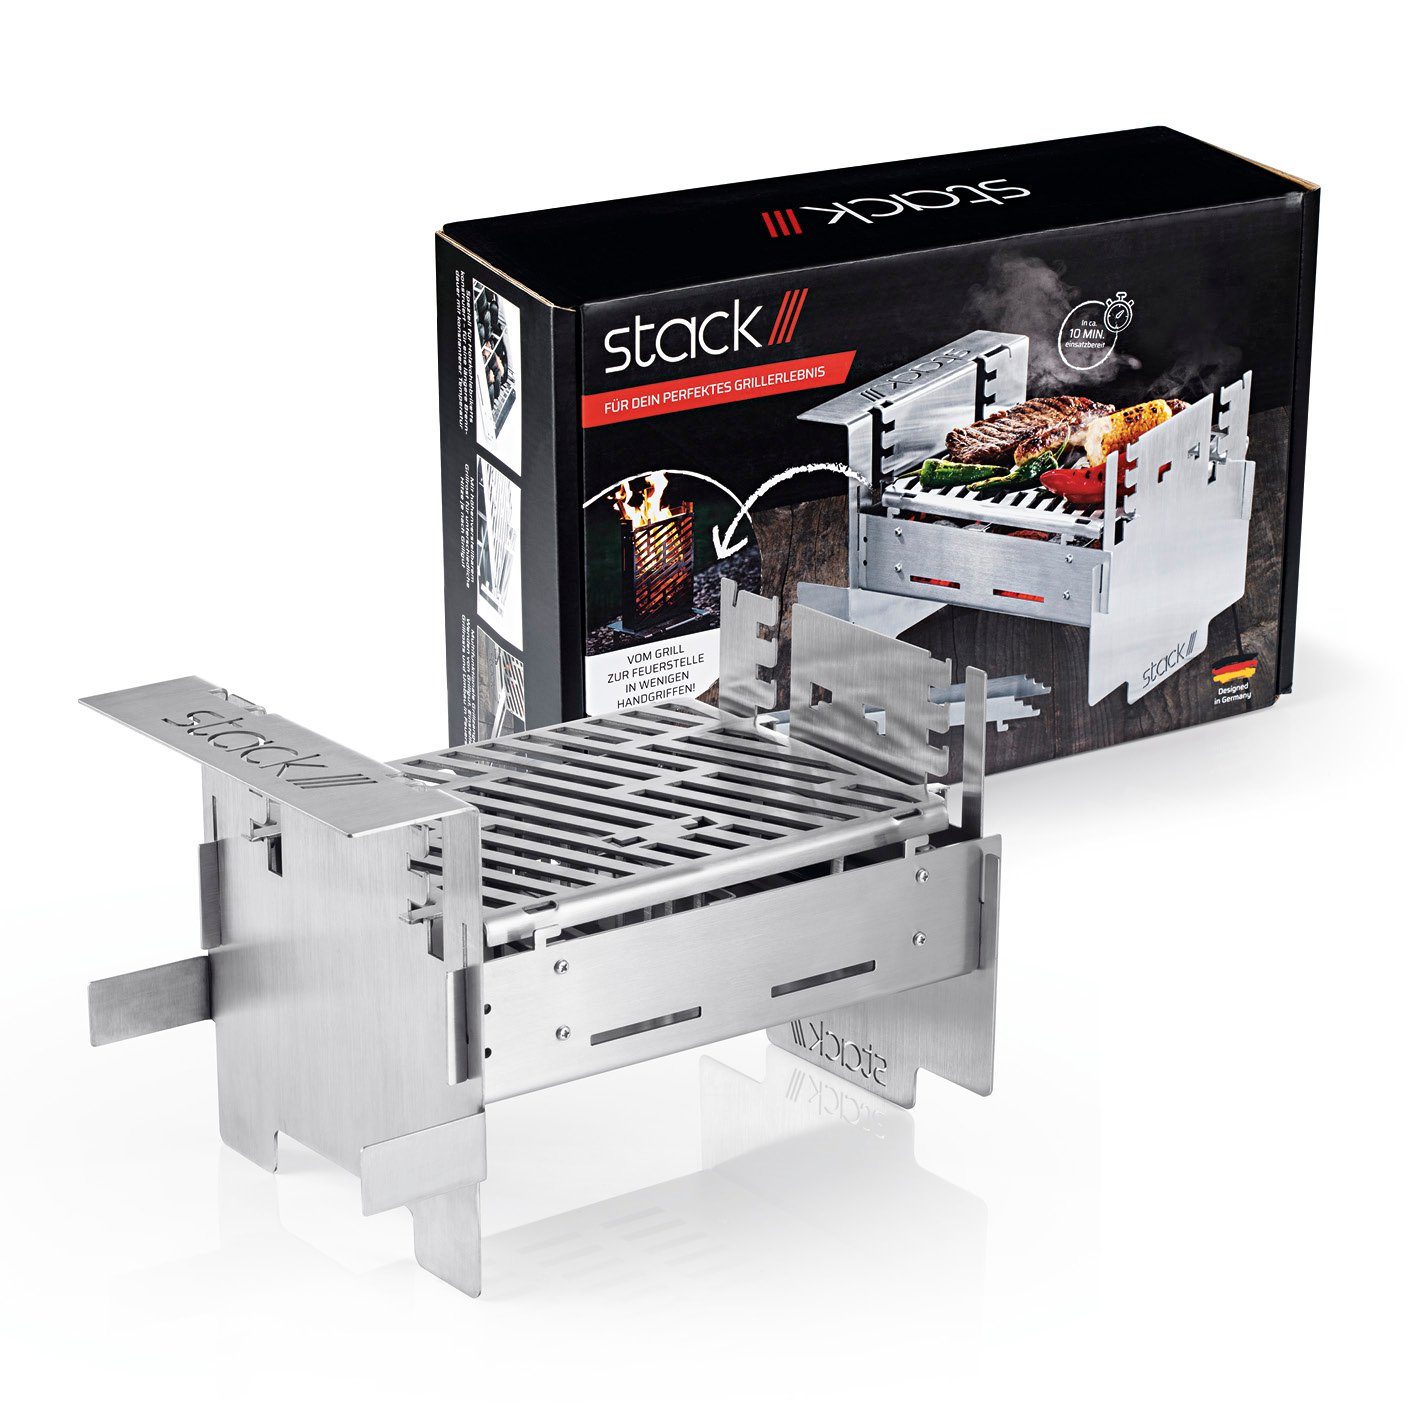 x grill, 1 Grill cm Feuerstelle und stack///grill stack 27 Grillfläche Trangia 21 Stack Holzkohlegrill 2 Feuerkorb n' in